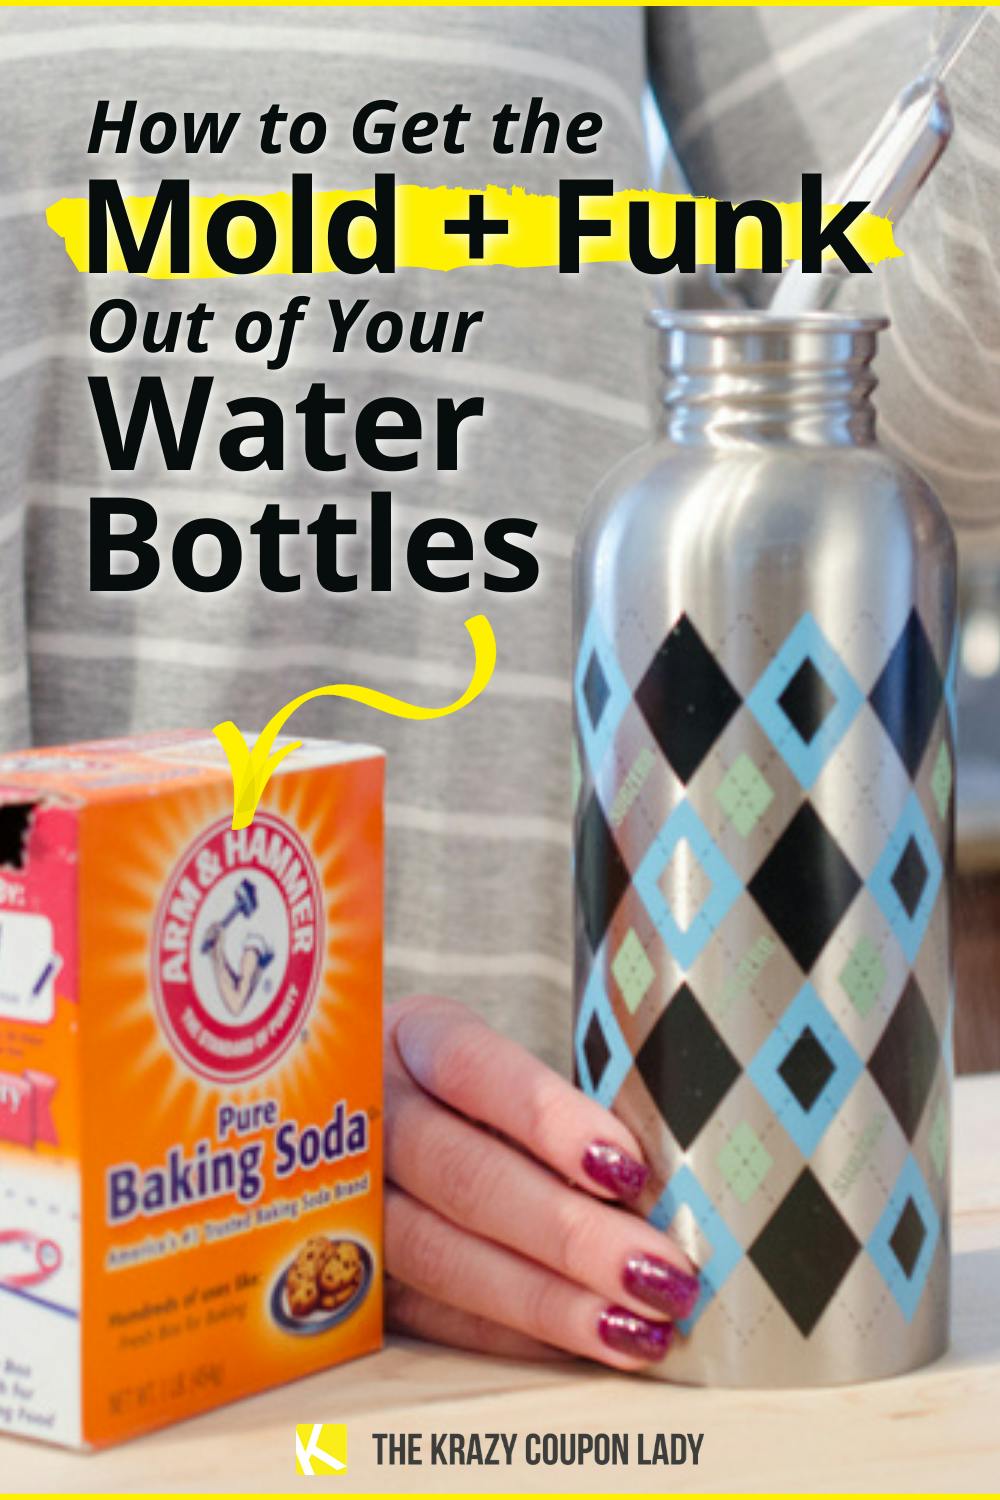 How to Clean Out the Funk & Mold in Water Bottles